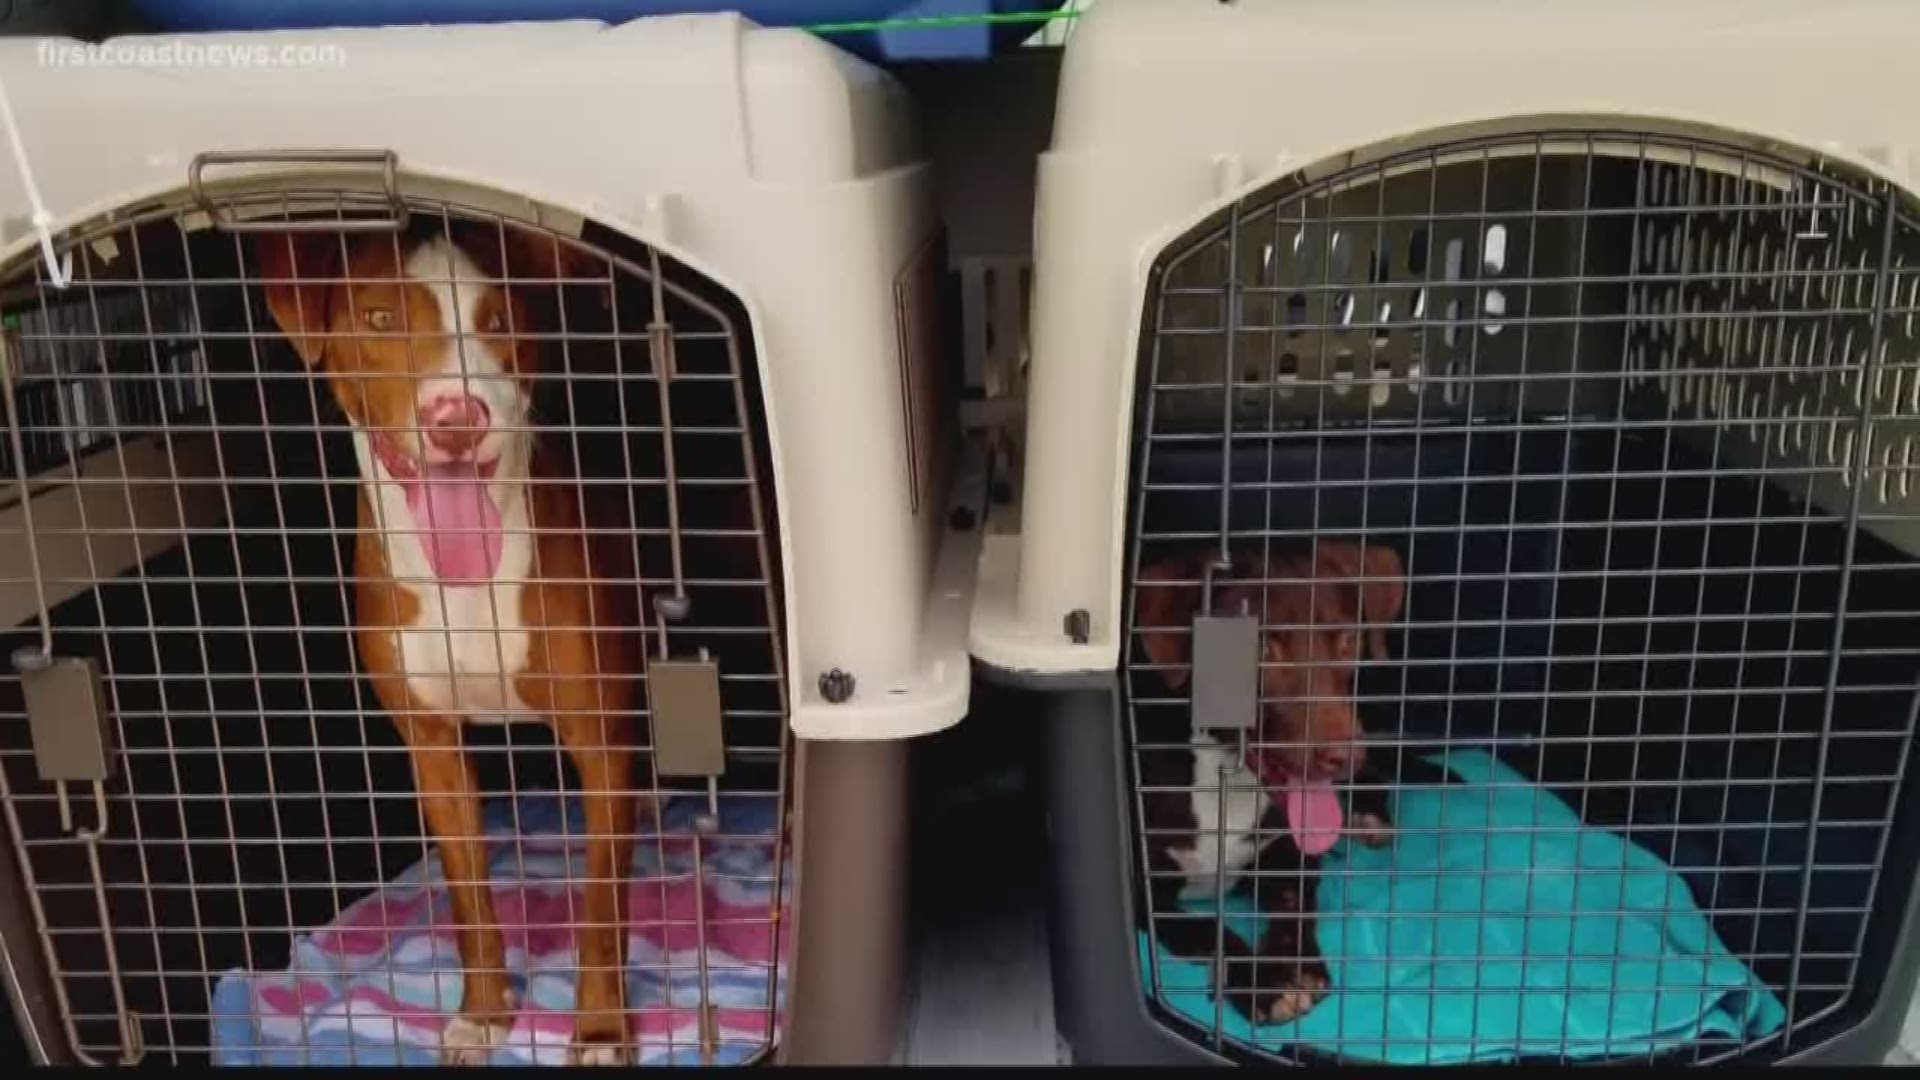 Even after nearly 100 First Coast dogs and cats were taken to higher ground in four rescue missions ahead of Hurricane Dorian, a Jacksonville non-profit says its job isn't over yet.